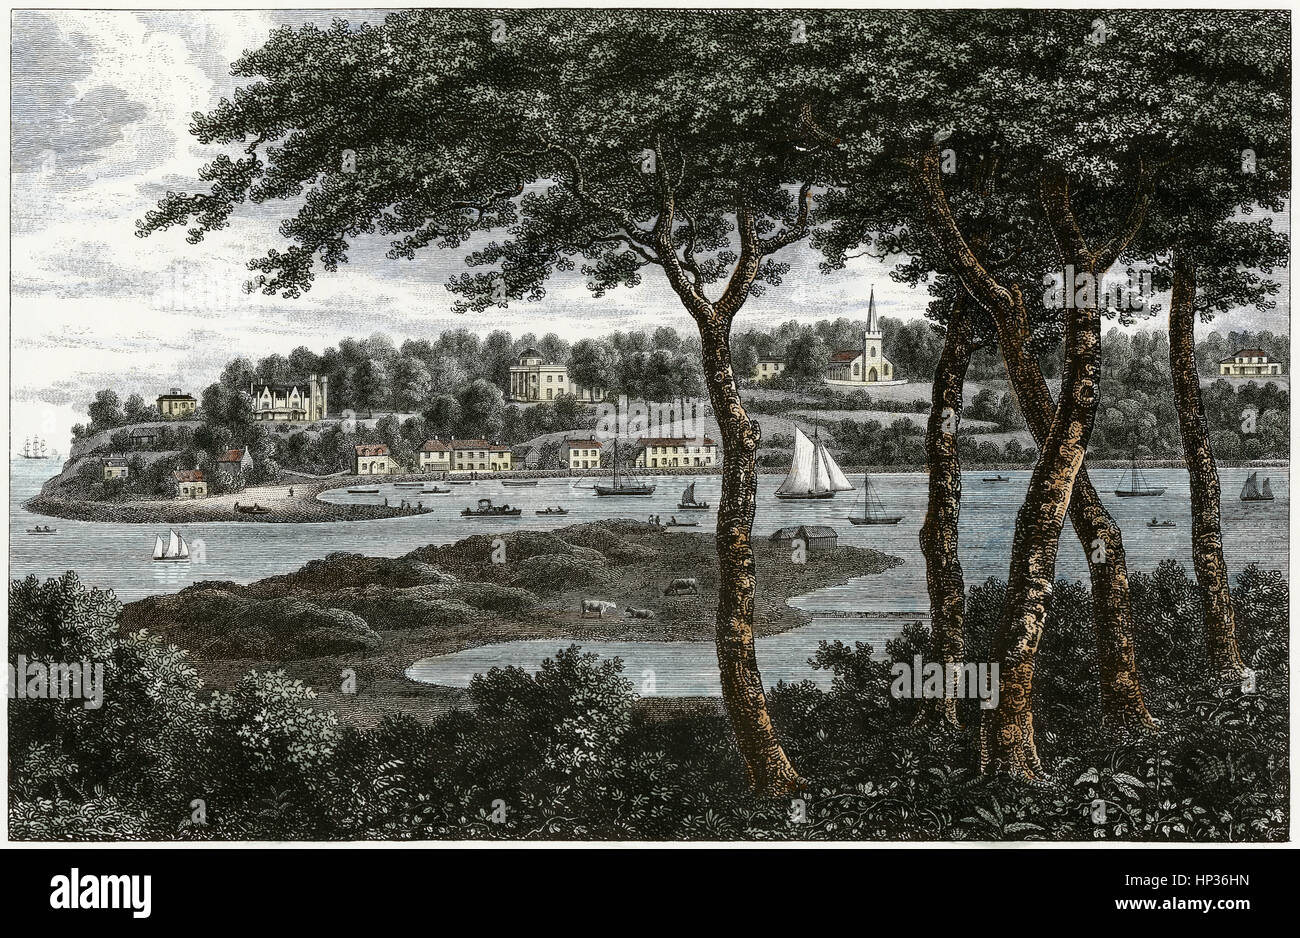 Antique c1840 hand-colored engraving, Bembridge and Entrance to Brading Haven. Bembridge is a village and civil parish located on the easternmost point of the Isle of Wight. Stock Photo